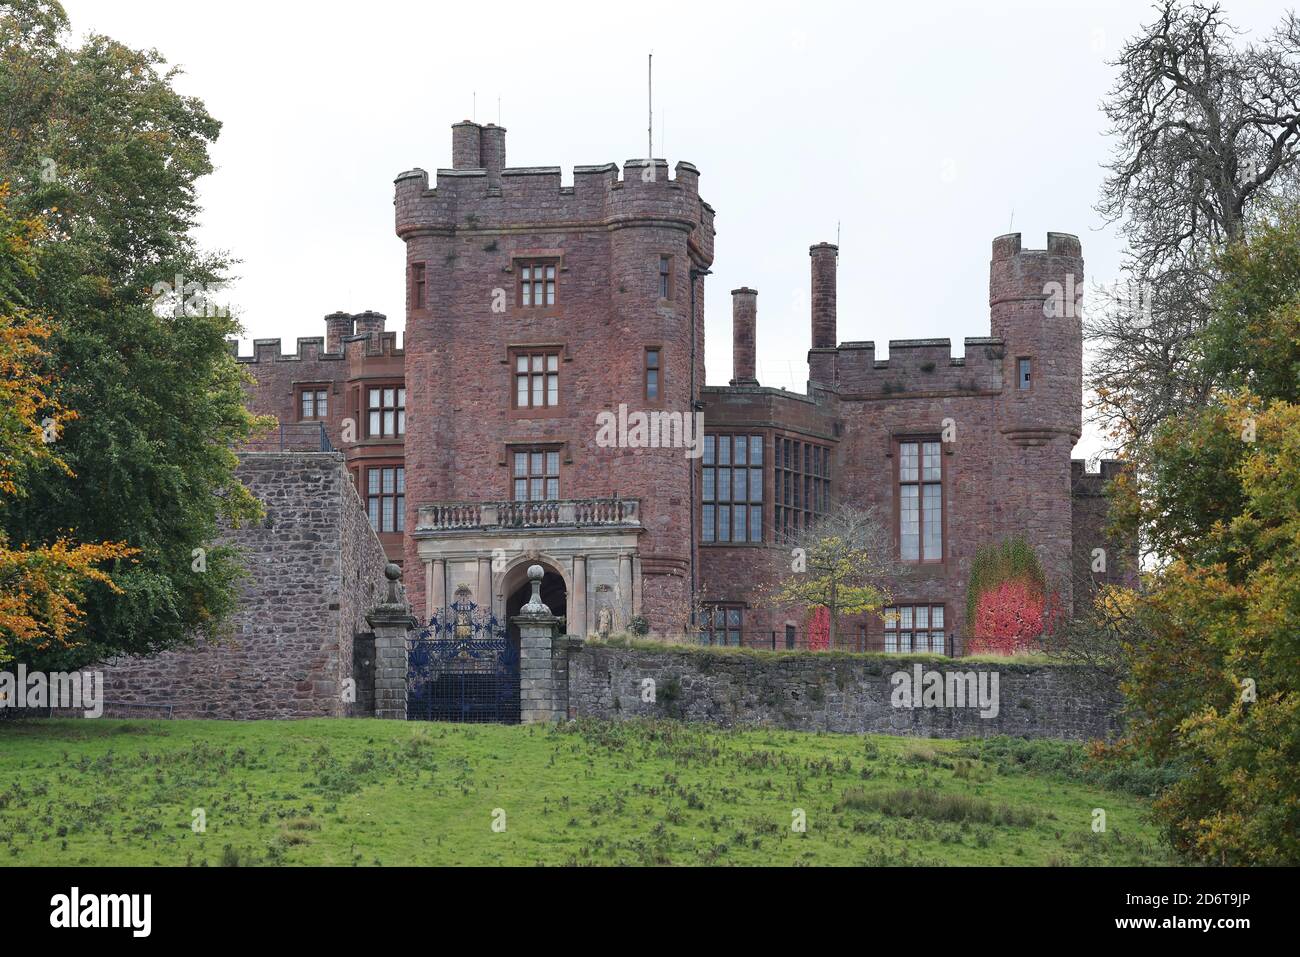 North East Gate of Powis Castle, Welshpool, Powys, regno unito Foto Stock